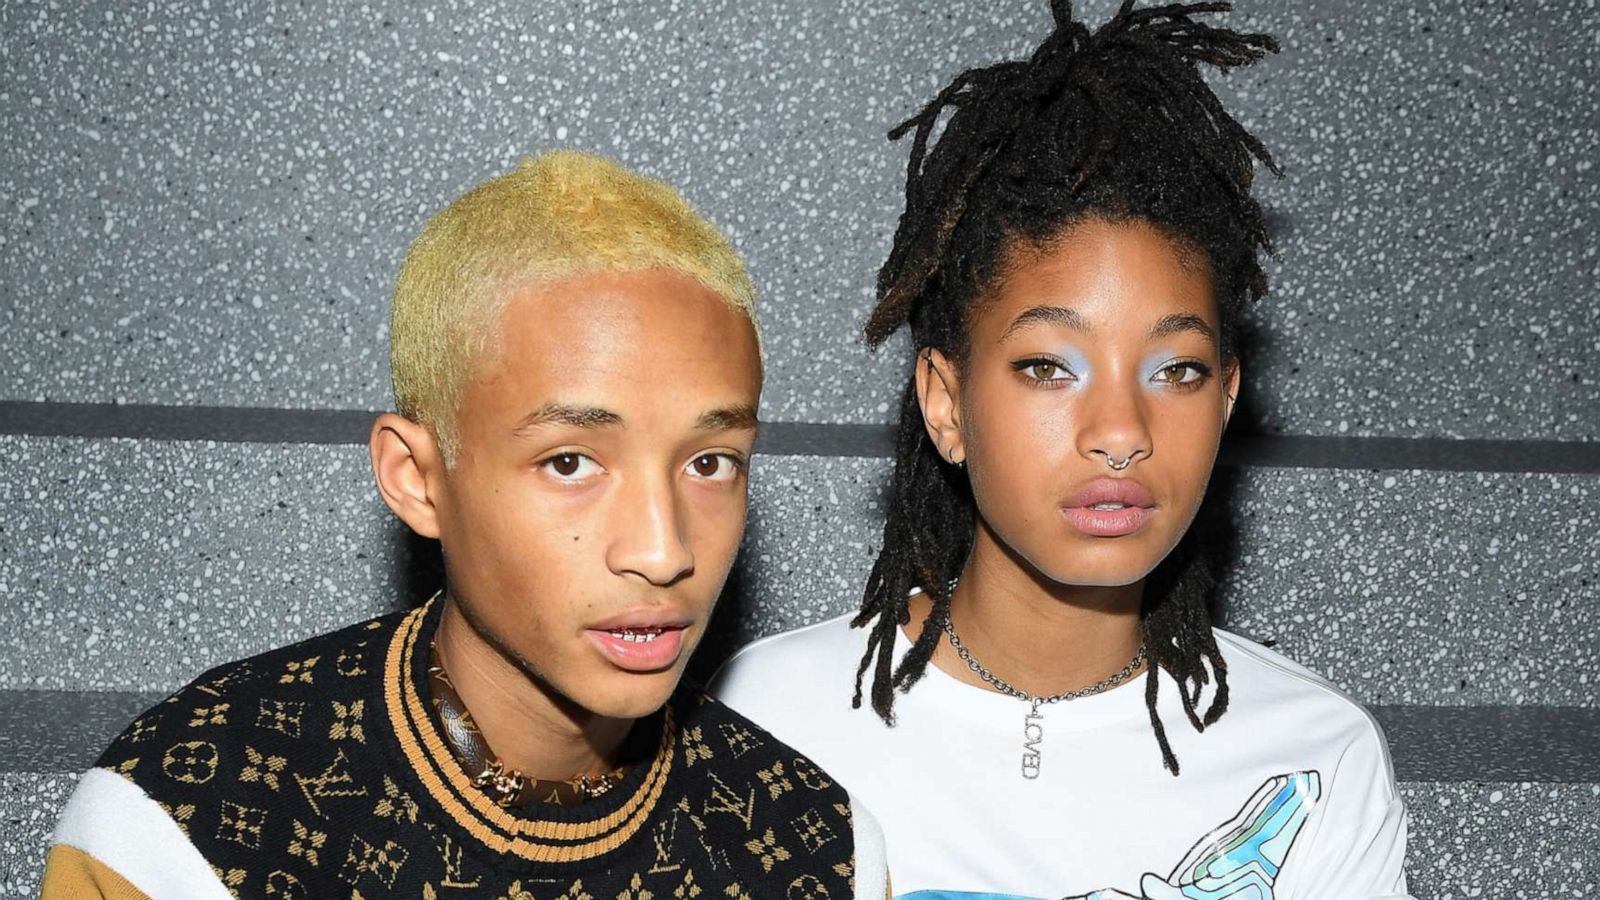 Jaden Smith Reveals How Much Weight He's Gained Since Doctor Told Him About  His Nutritional Deficiencies: Photo 4682131 | Jada Pinkett Smith, Jaden  Smith, Willow Smith Photos | Just Jared: Entertainment News